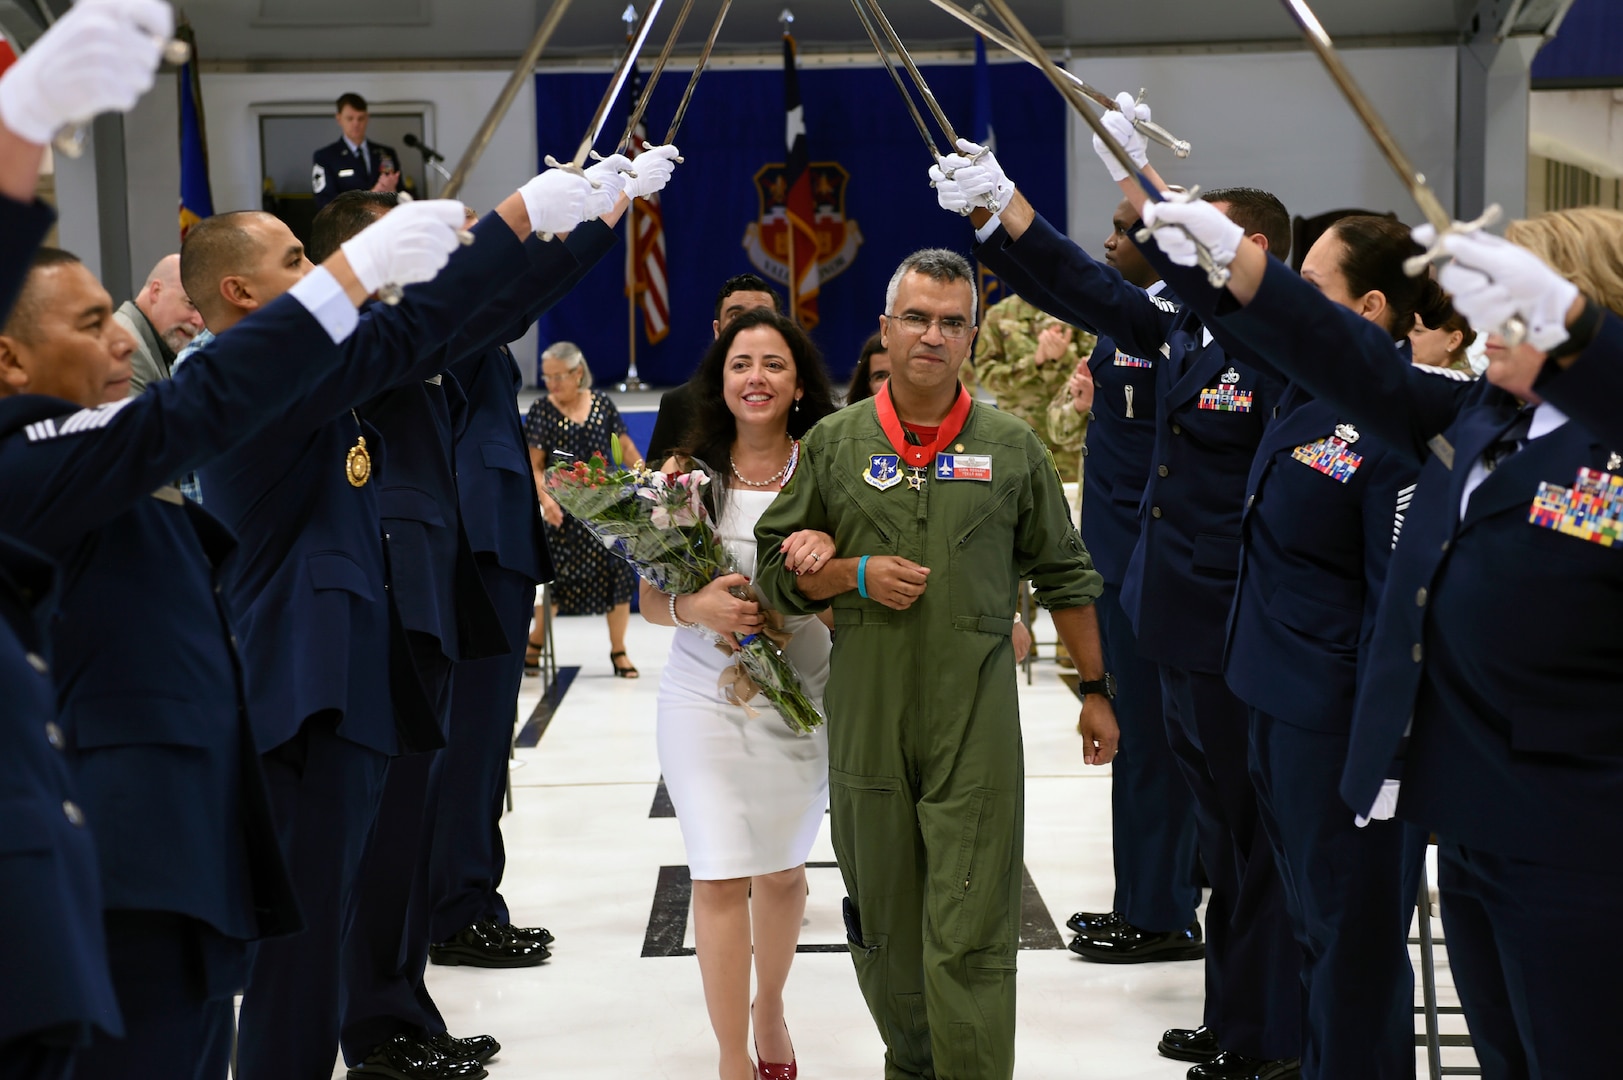 Col. Raul Rosario, the outgoing command for the 149th Fighter Wing, walks with his wife, Sheila